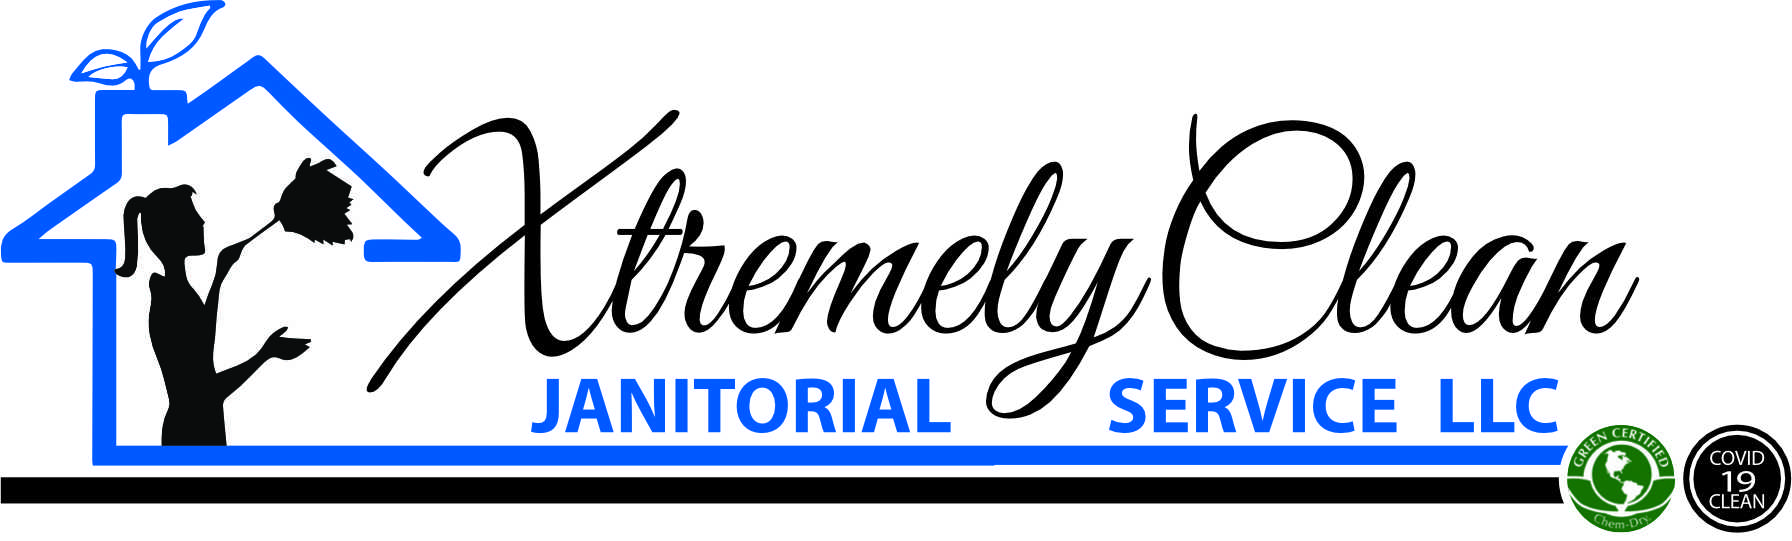 Xtremely Clean Janitorial Services